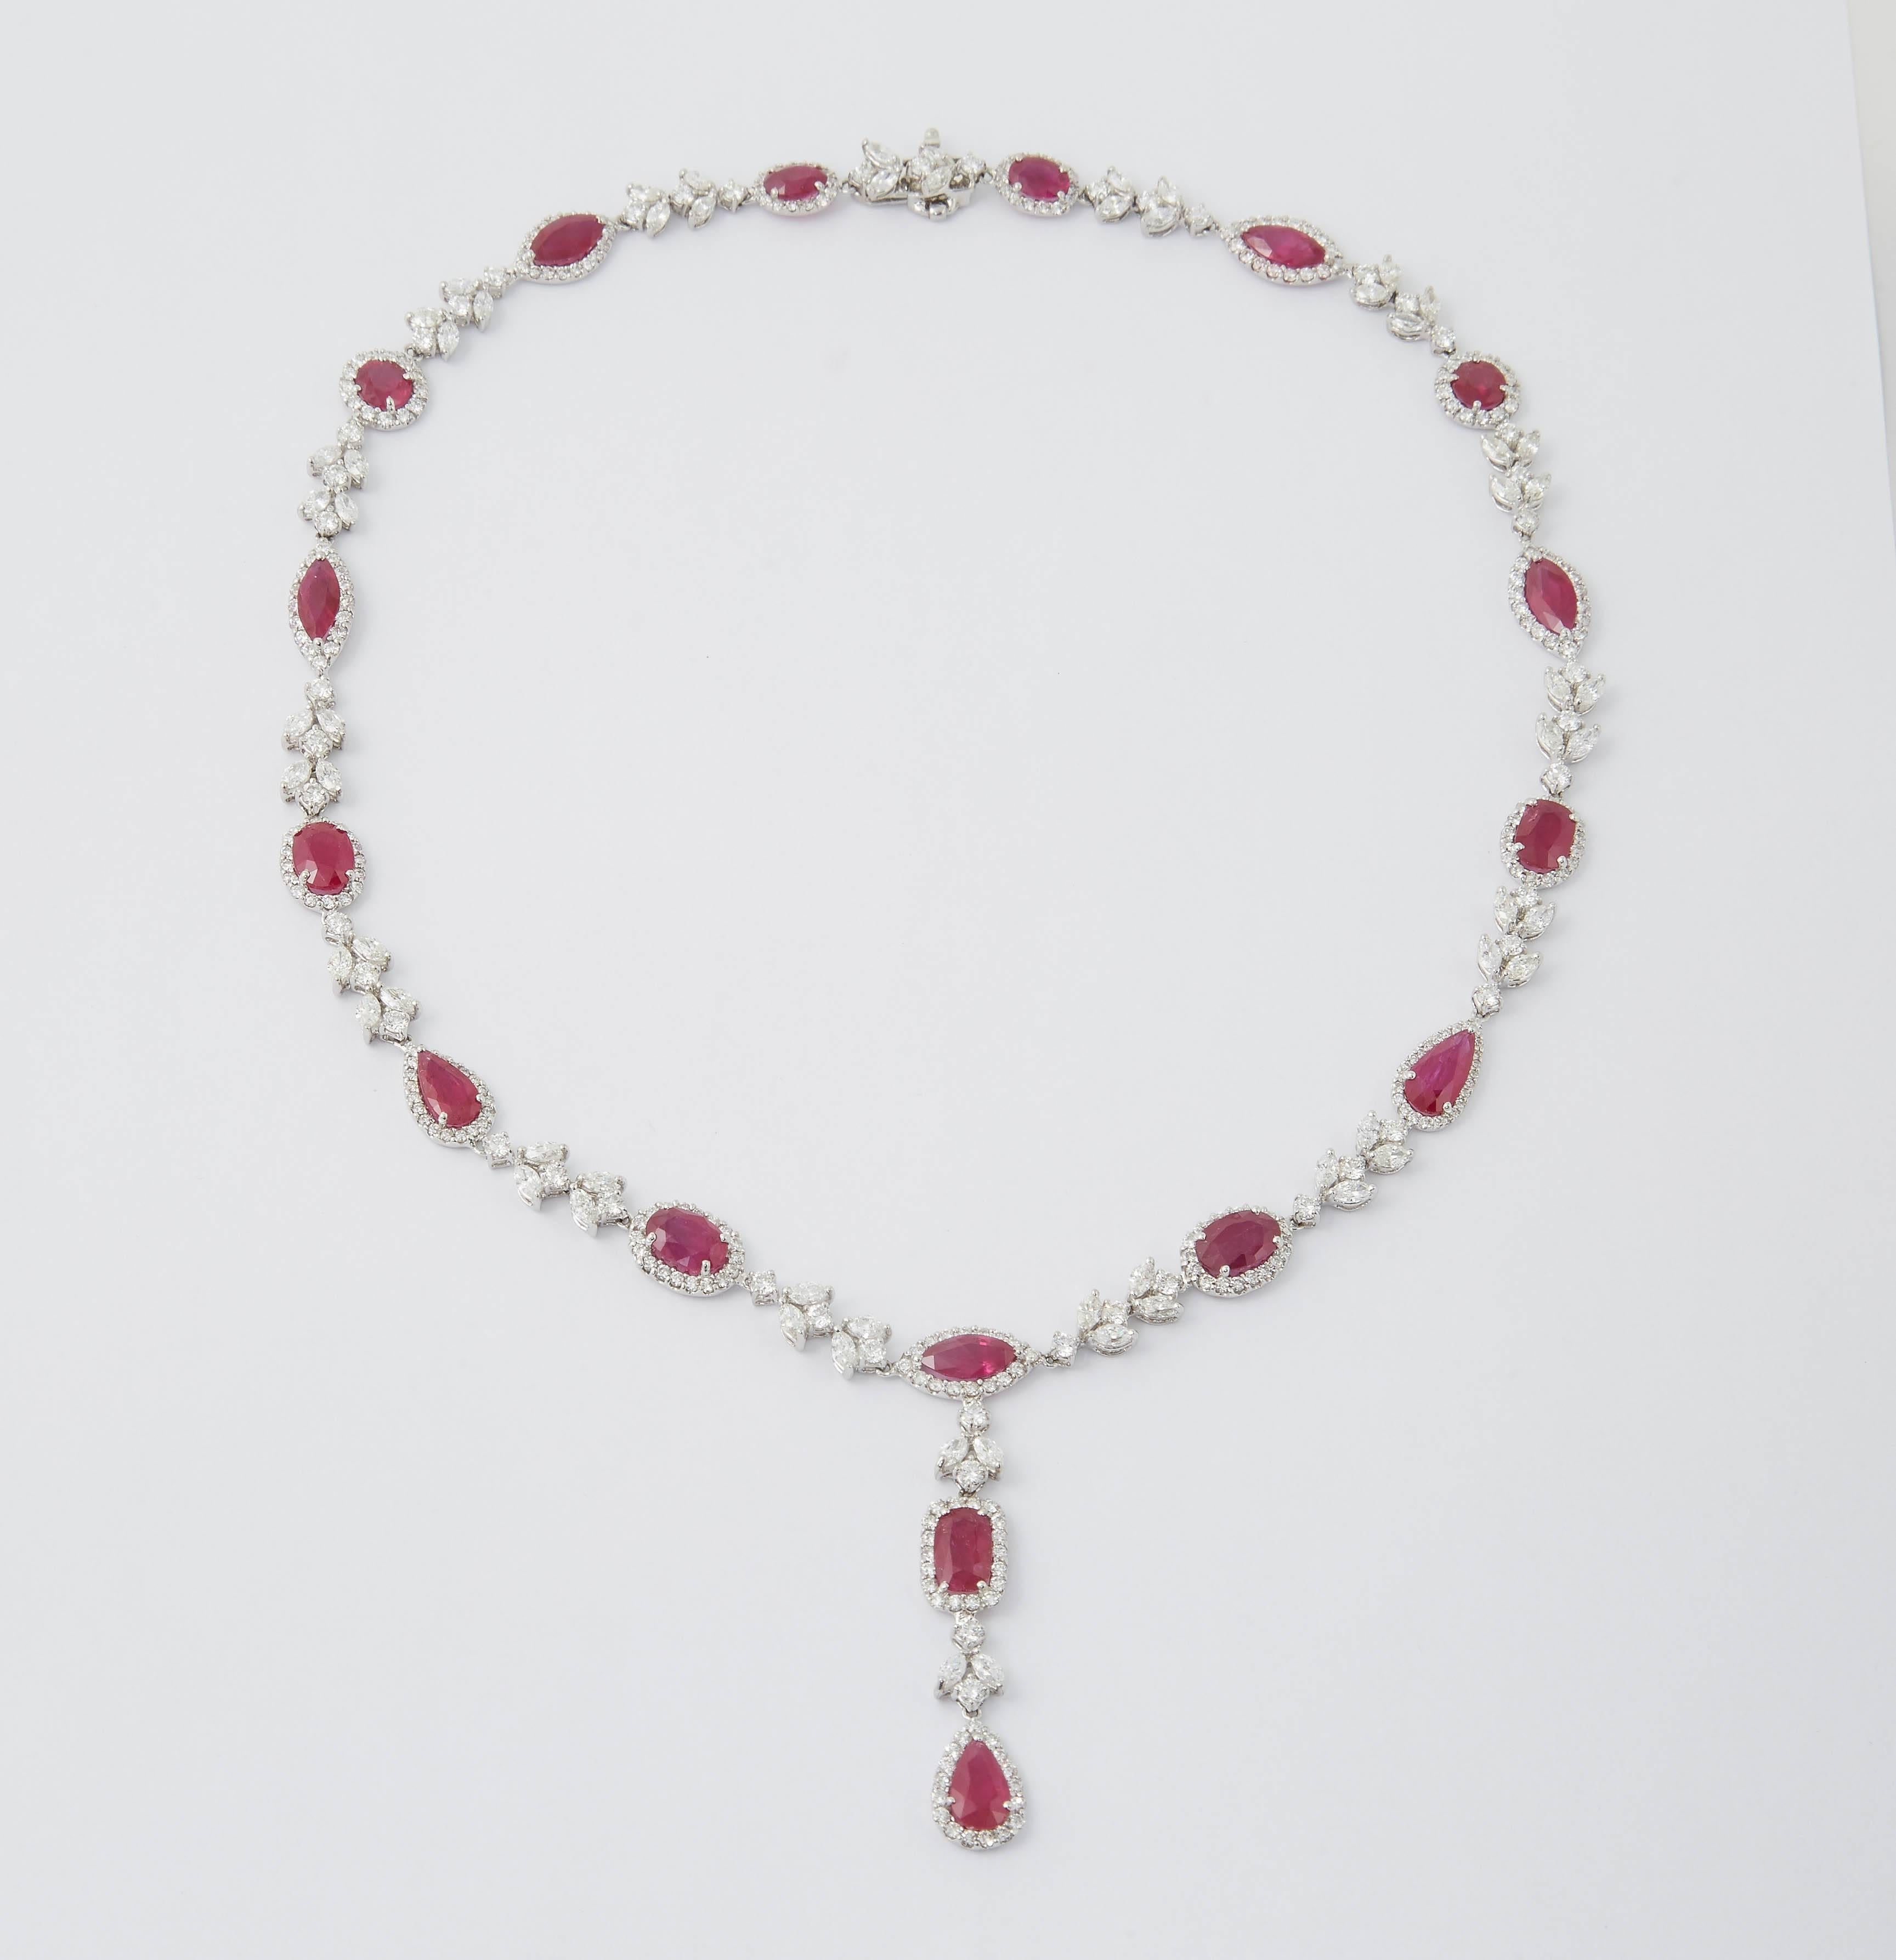 
A beautiful one of a kind piece.

25.27  carats of vivid ruby in multiple shapes. Round, pear, cushion, oval and marquise. 

14.75 carats of white diamonds, marquise and round brilliant shapes.

Approximately 17.5 inches in length with a 2 inch